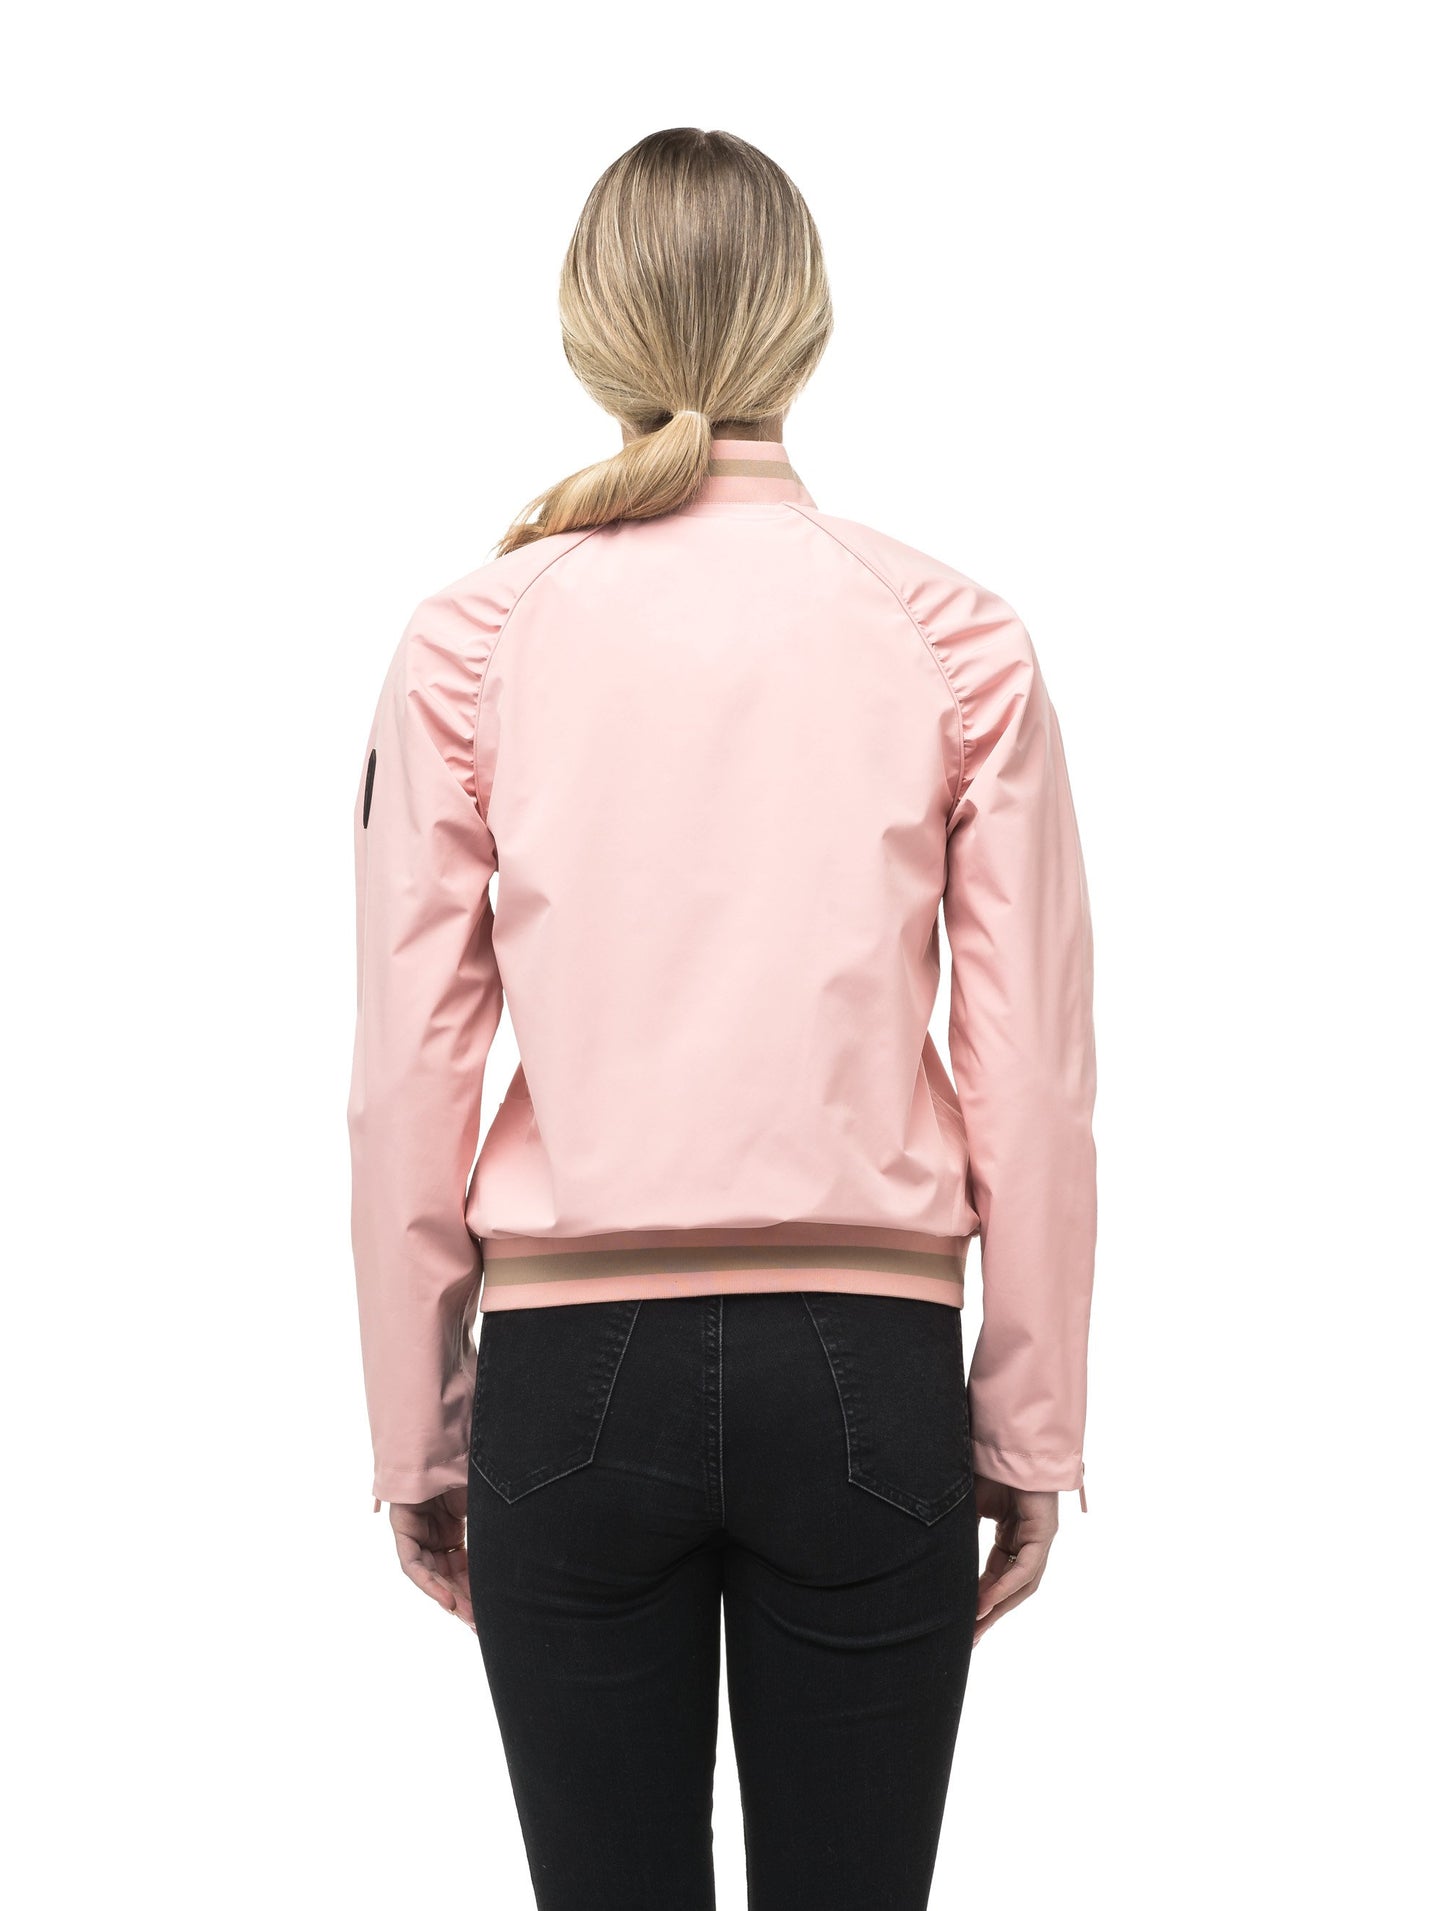 Women's classic bomber jacket called Phoebe in Shell Pink